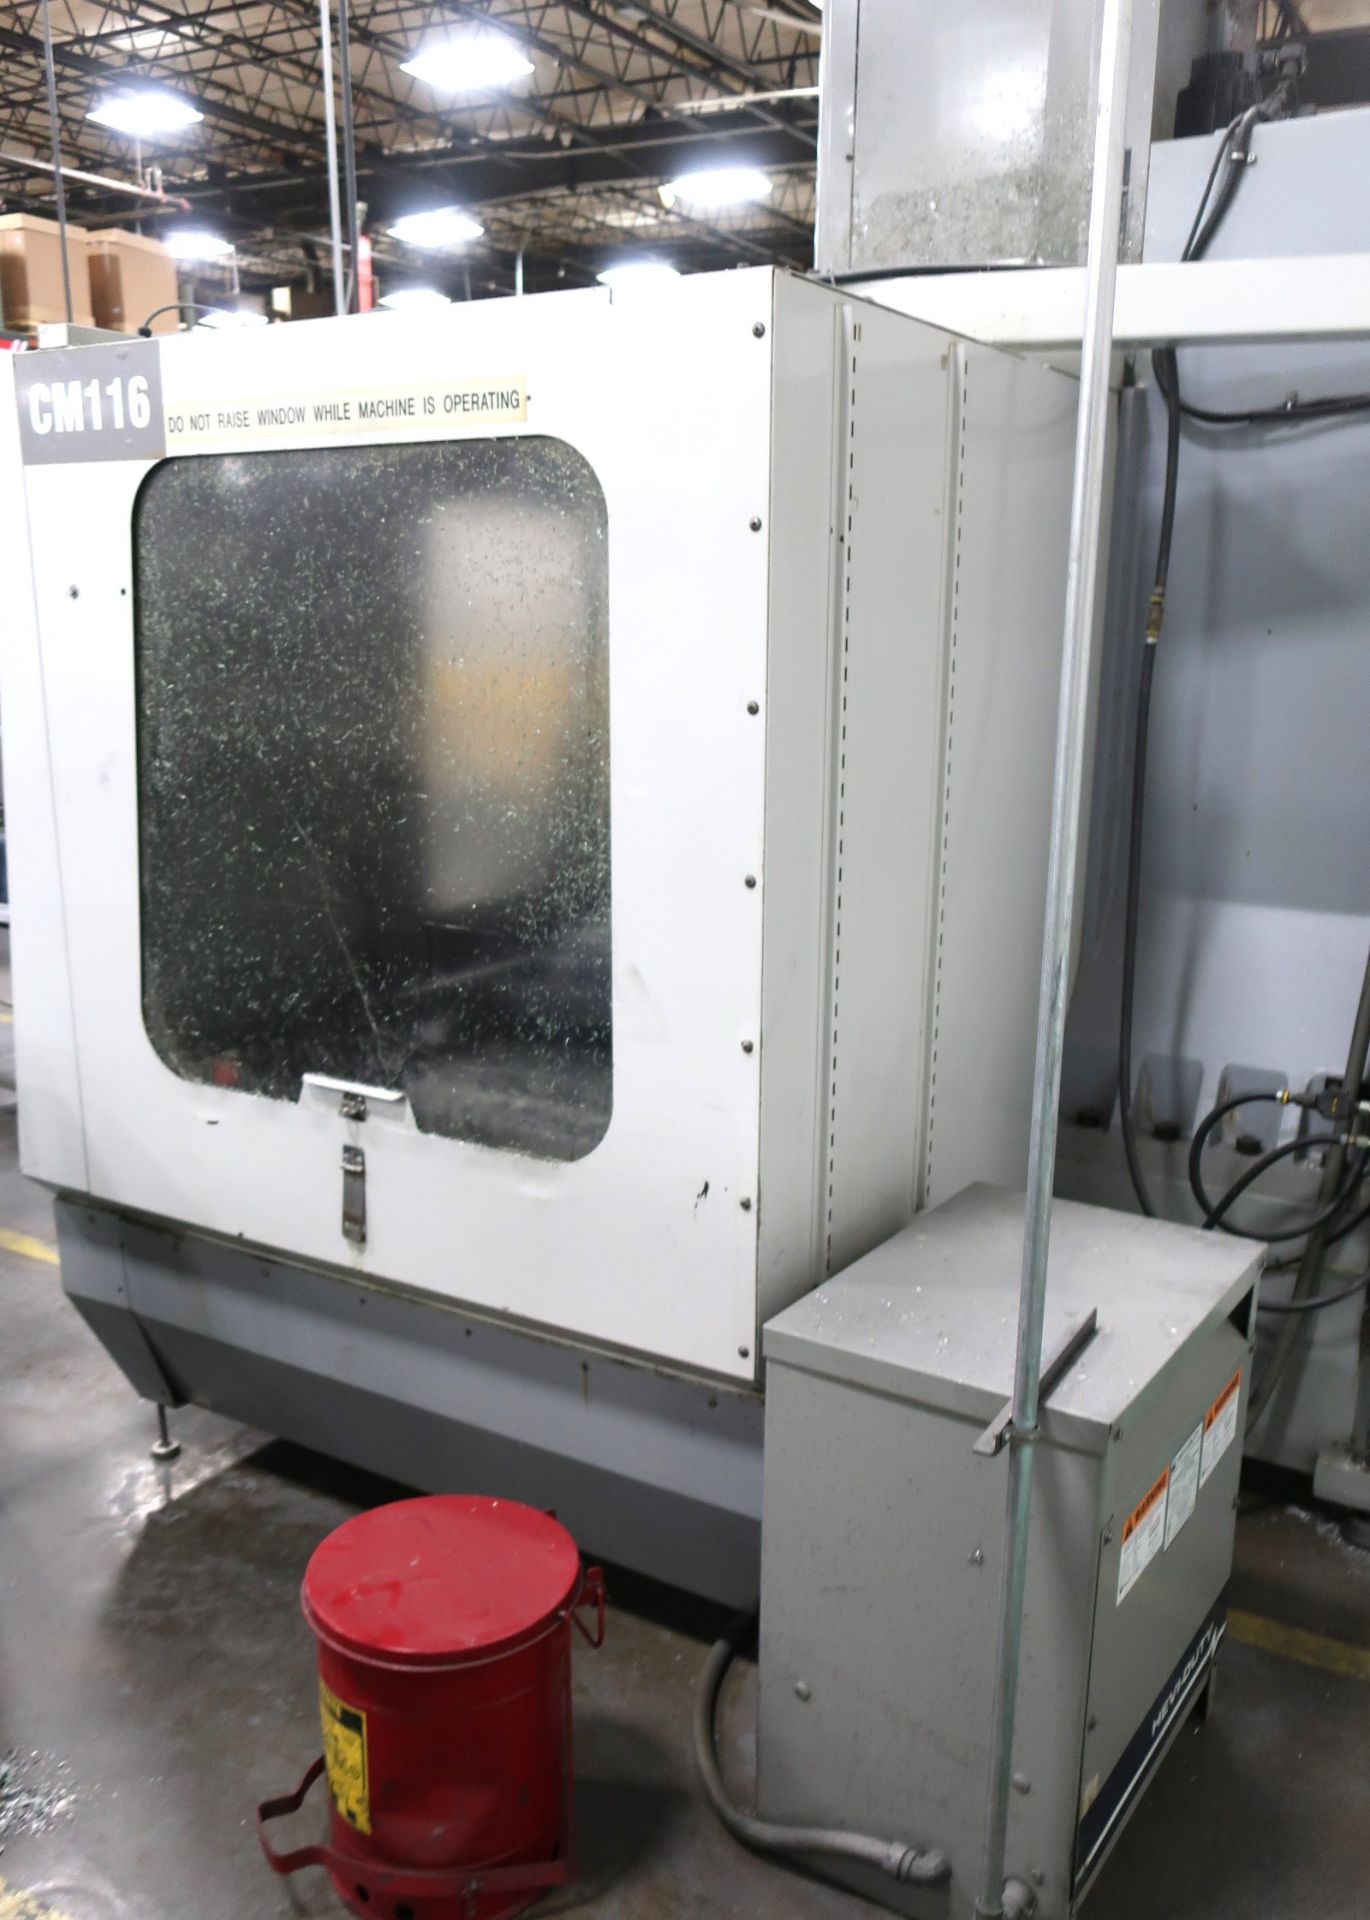 HAAS MODEL VF-3 CNC VERTICAL MACHINING CENTER, NEW 2005 - Image 9 of 21